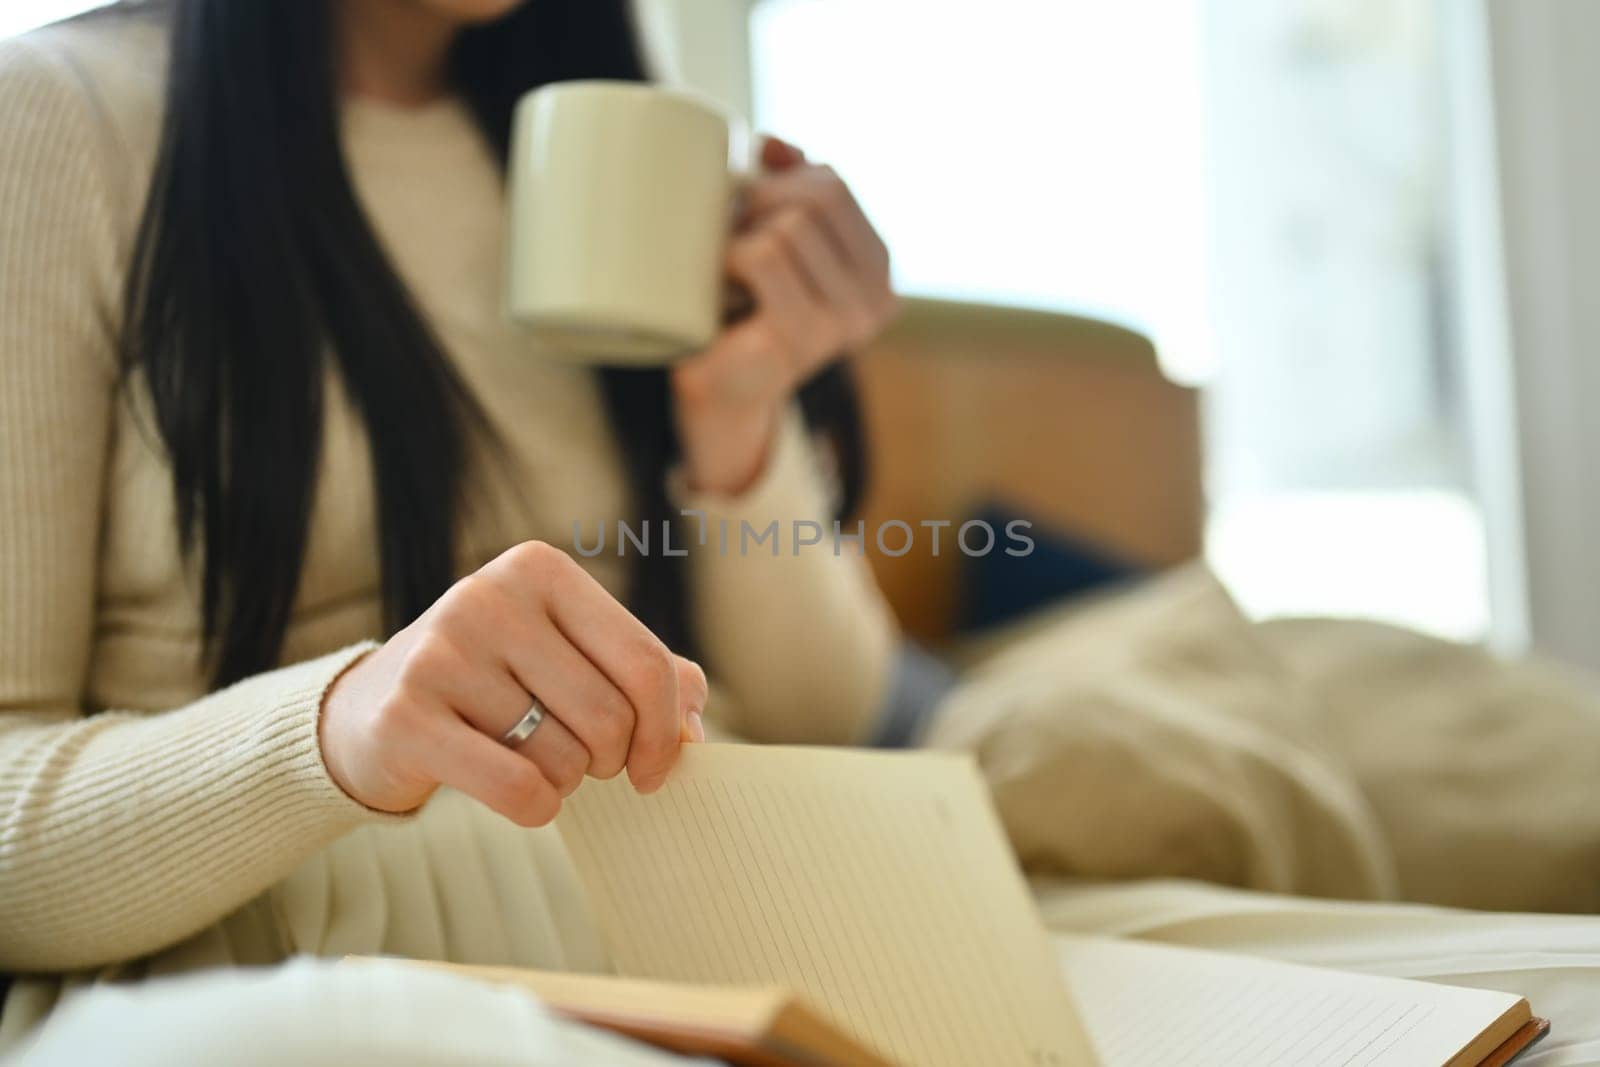 Calm young woman in warm sweater drinking hot tea and reading book in living room.